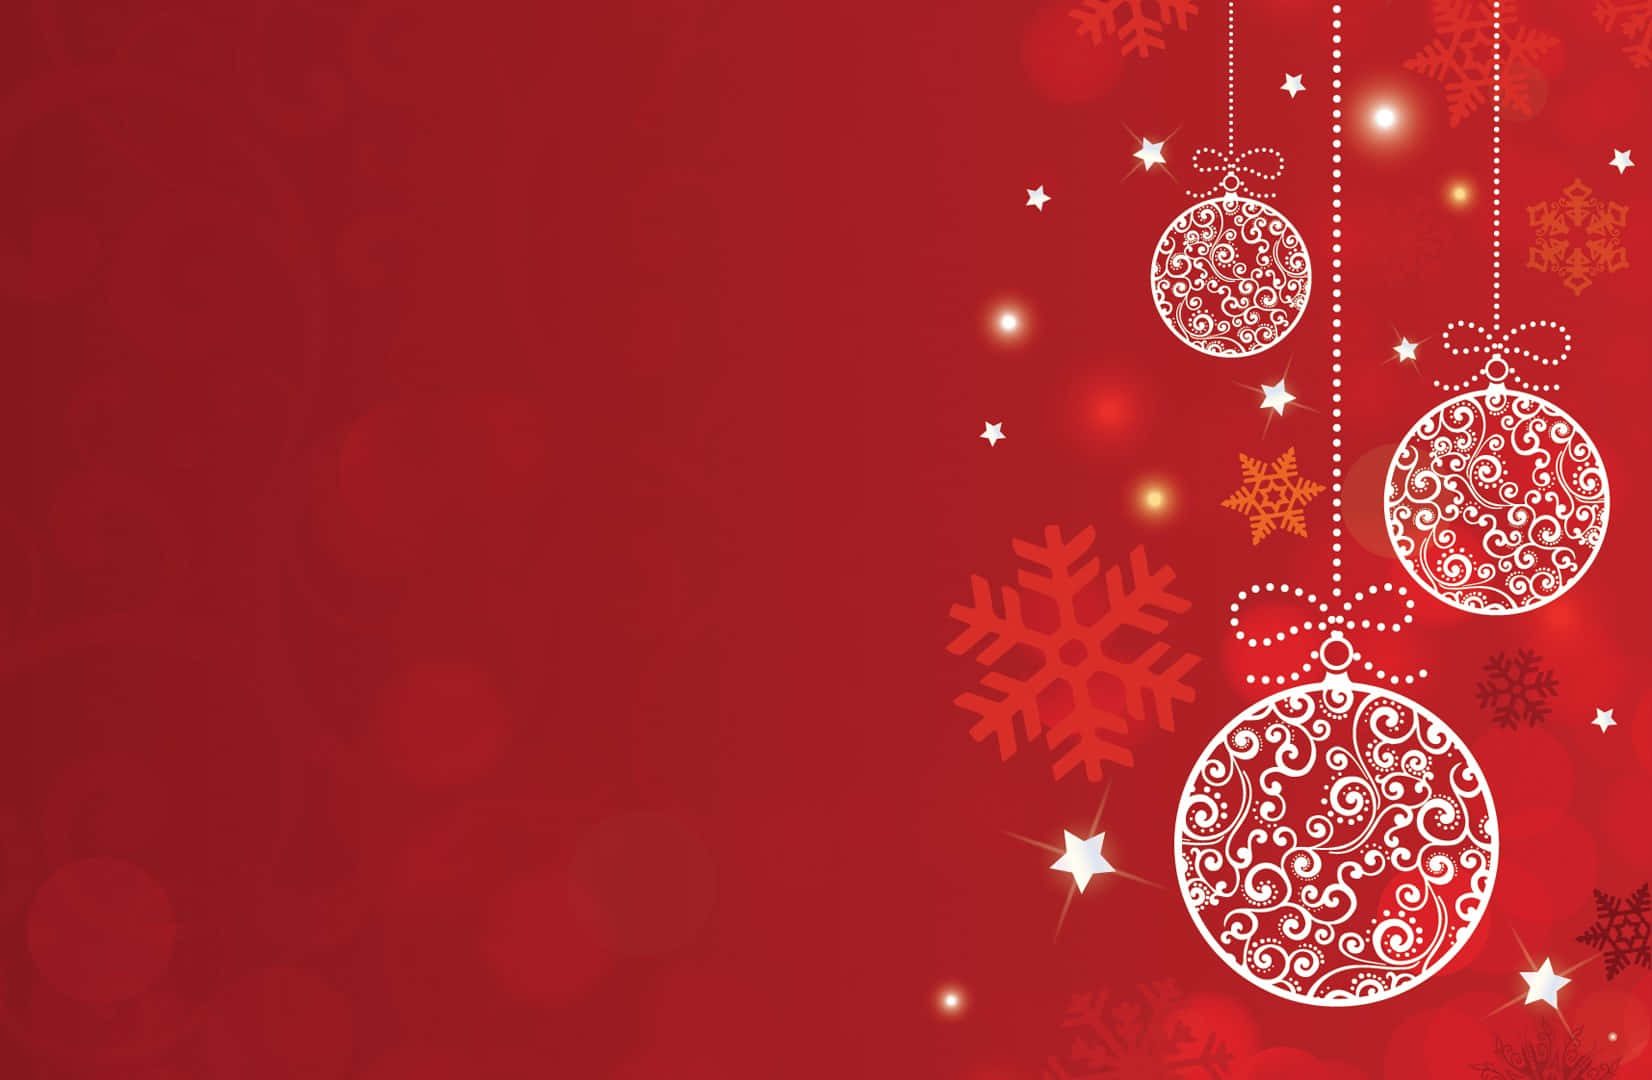 Get into the festive spirit with a red aesthetic Christmas! Wallpaper